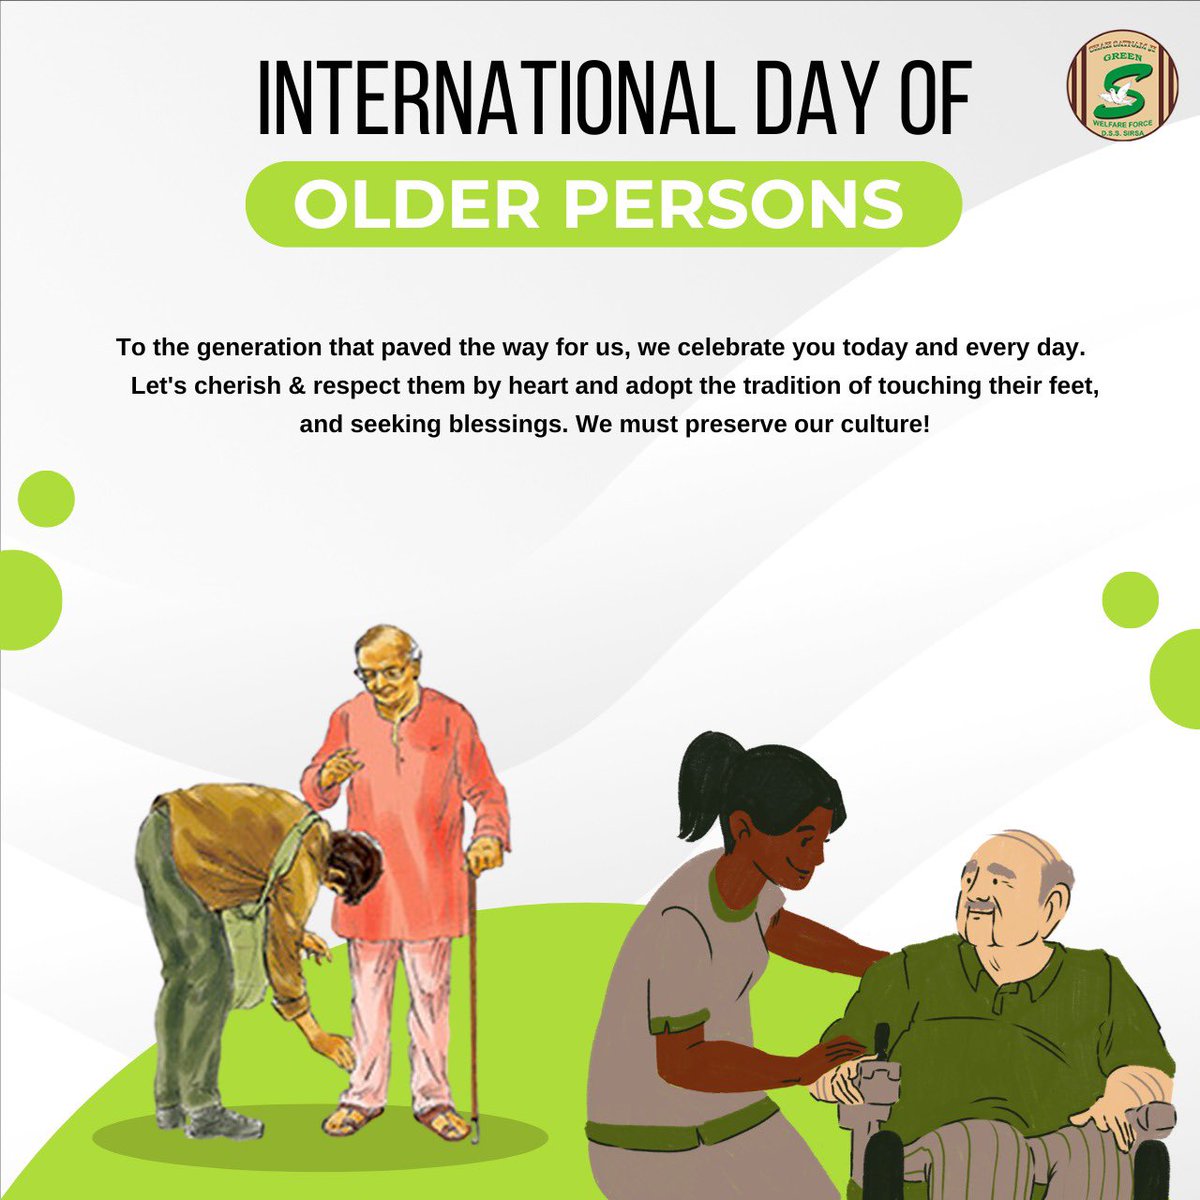 Our elders are the living bridges to our past and the keepers of our traditions.
On this #InternationalDayOfOlderPersons, let's reflect on their sacrifices & wisdom that paved the way for our futures. Let's commit to care for them, and treat them with dignity and respect.